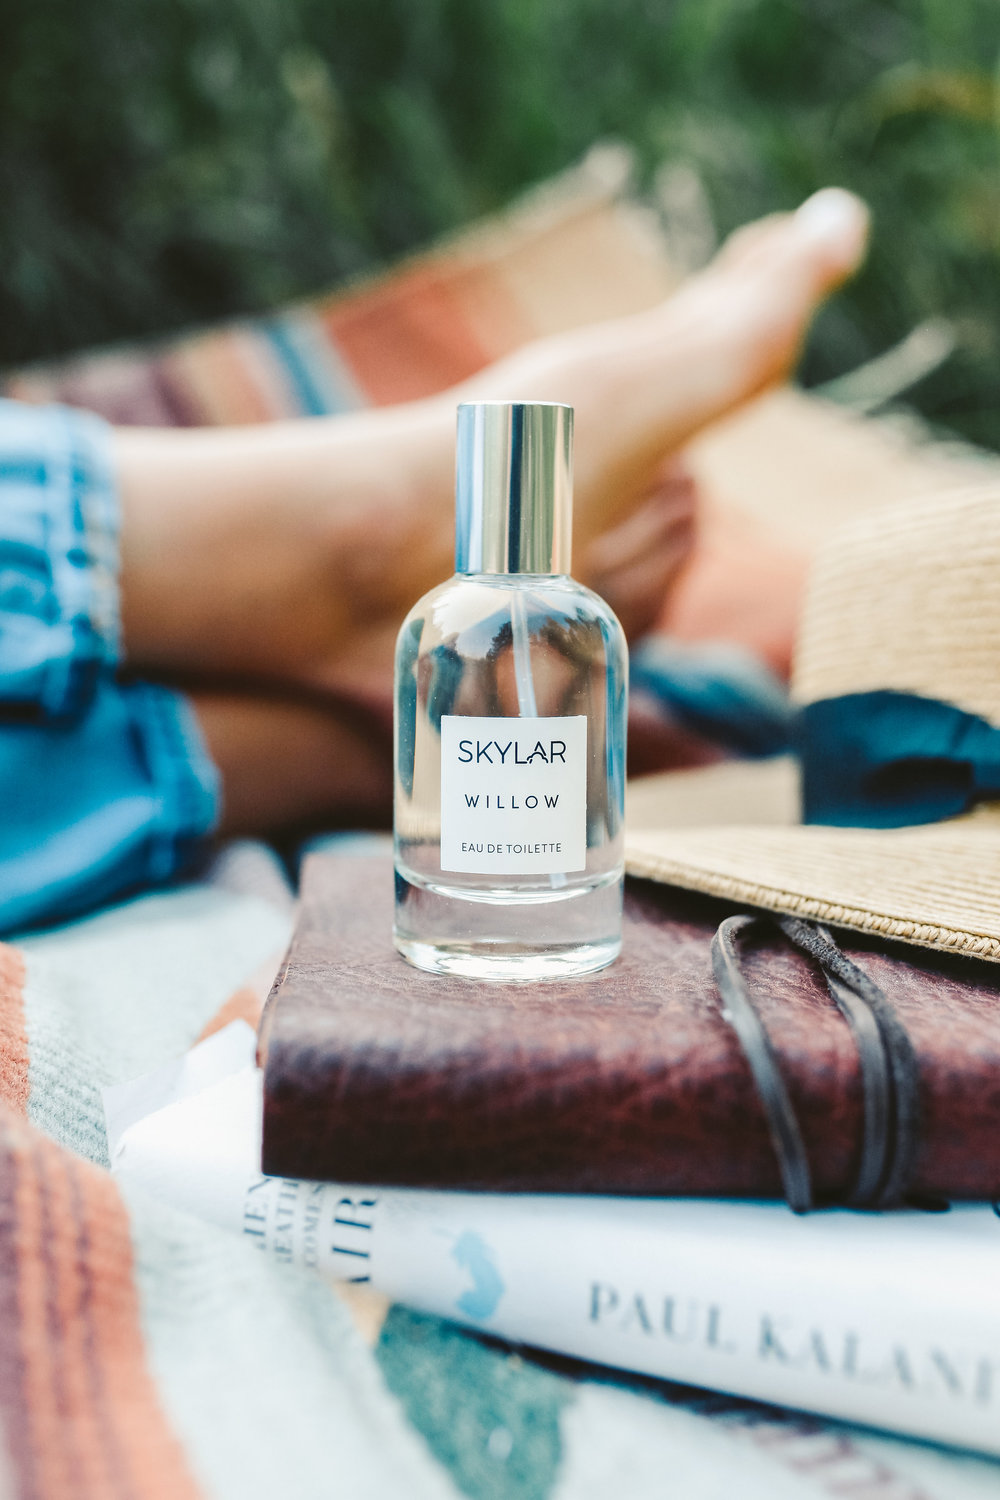 skylar's new scent willow makes you feel like you're out in nature